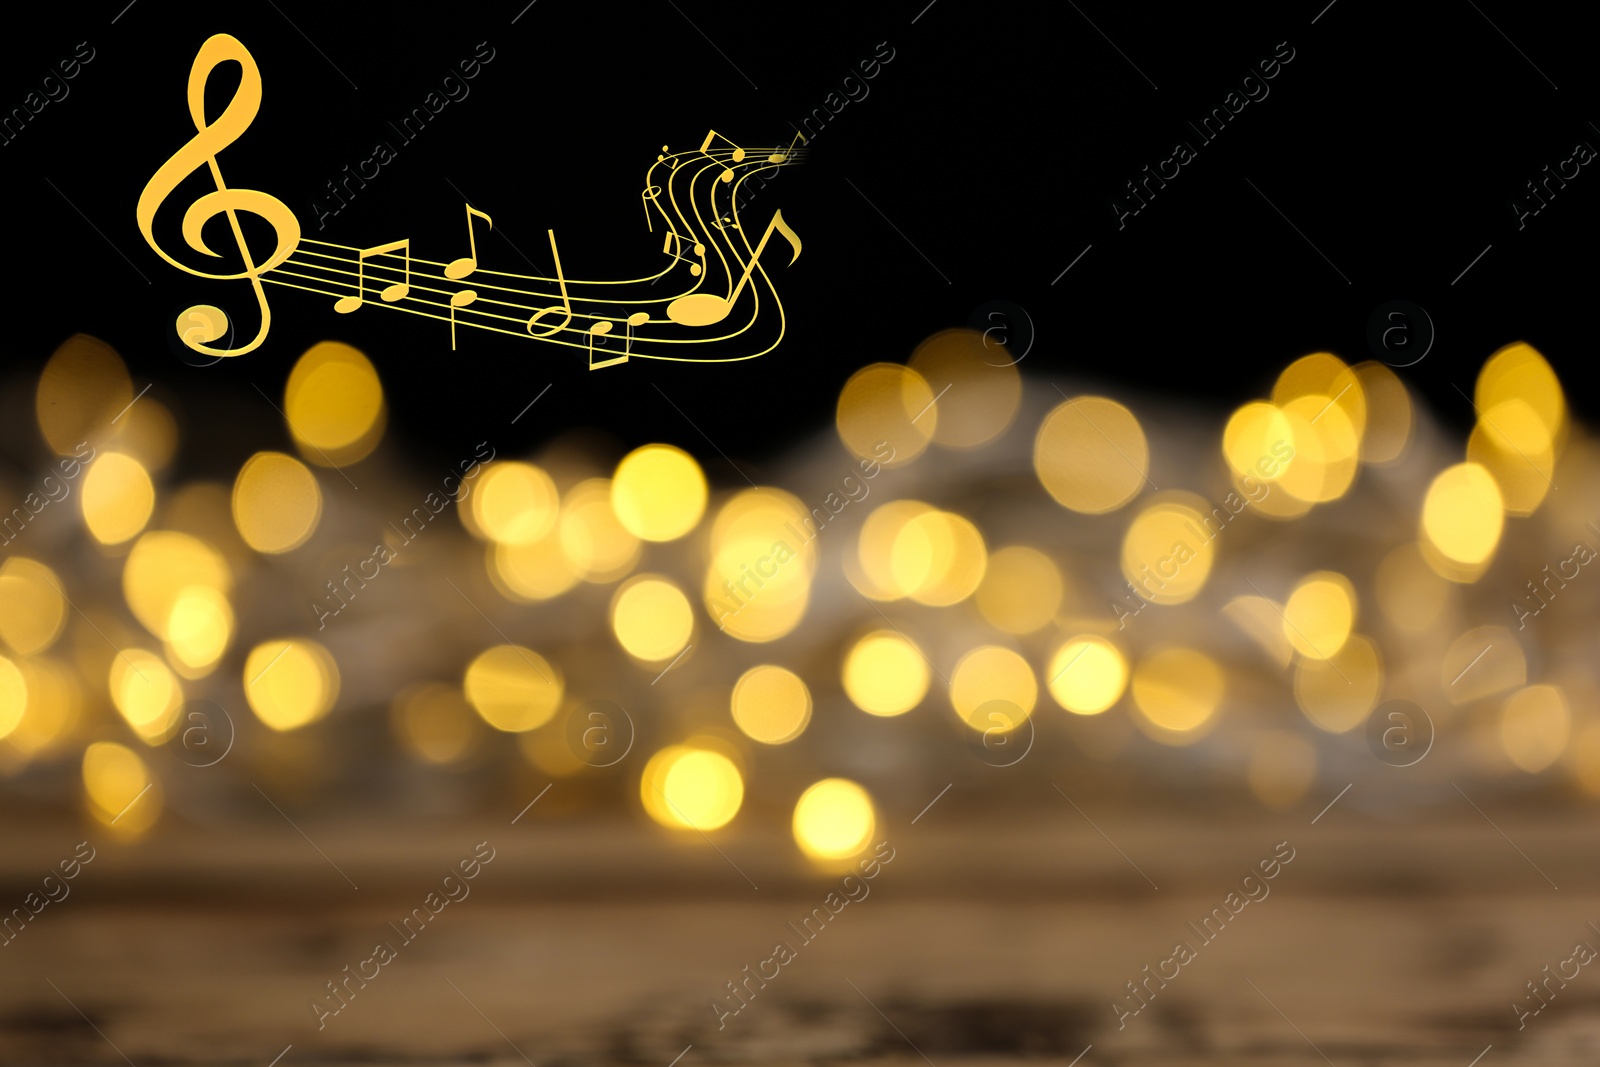 Image of Music notes on dark background, bokeh effect